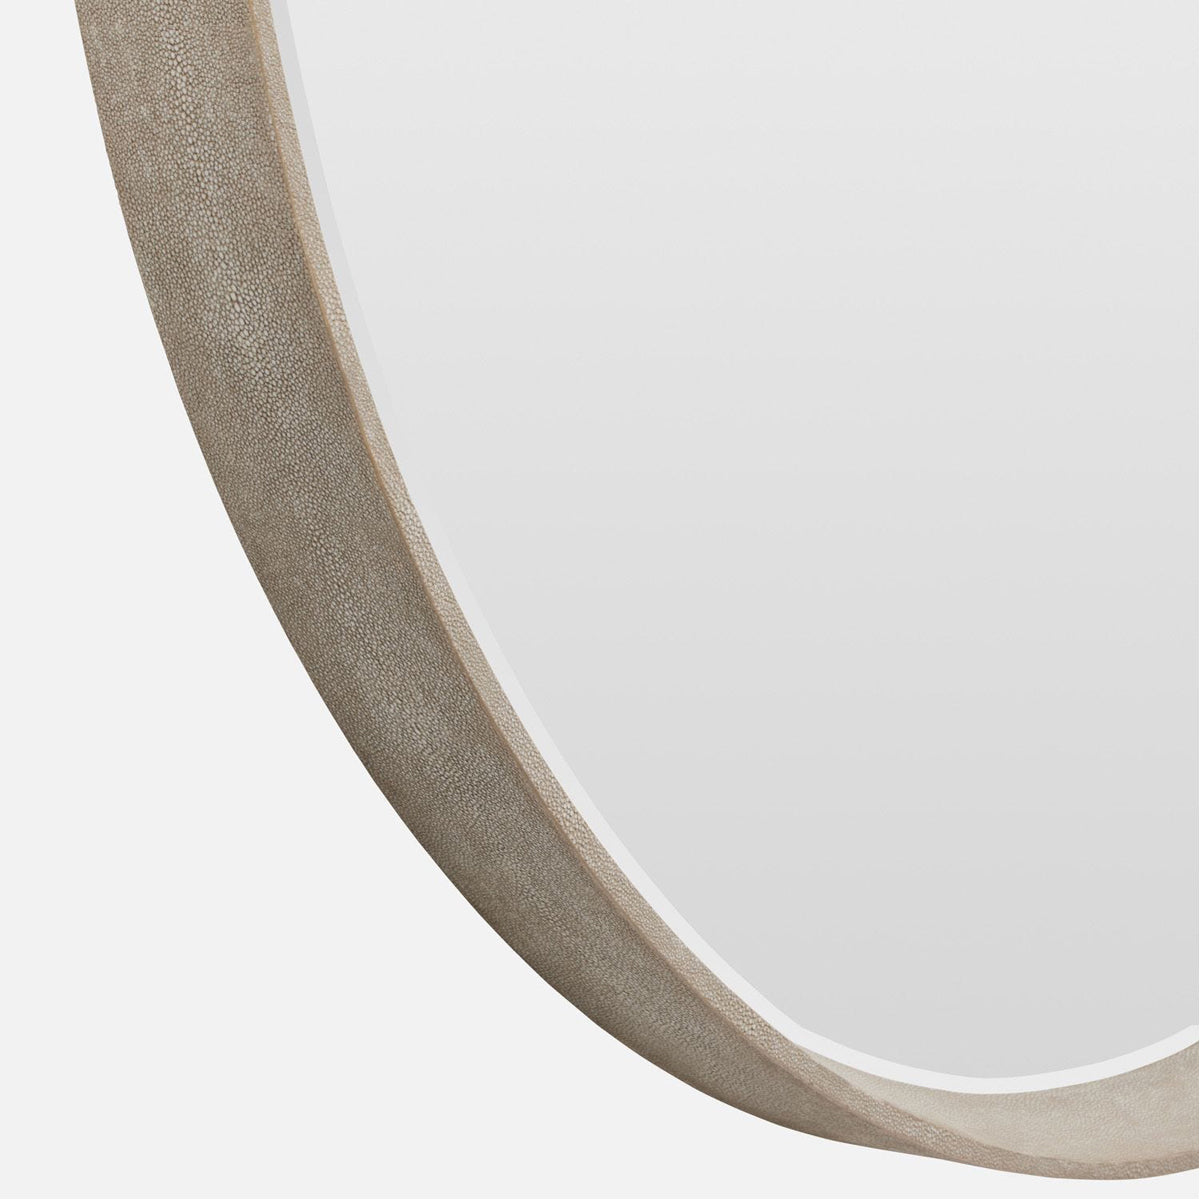 Made Goods Emma Minimal Mirror in Realistic Faux Shagreen